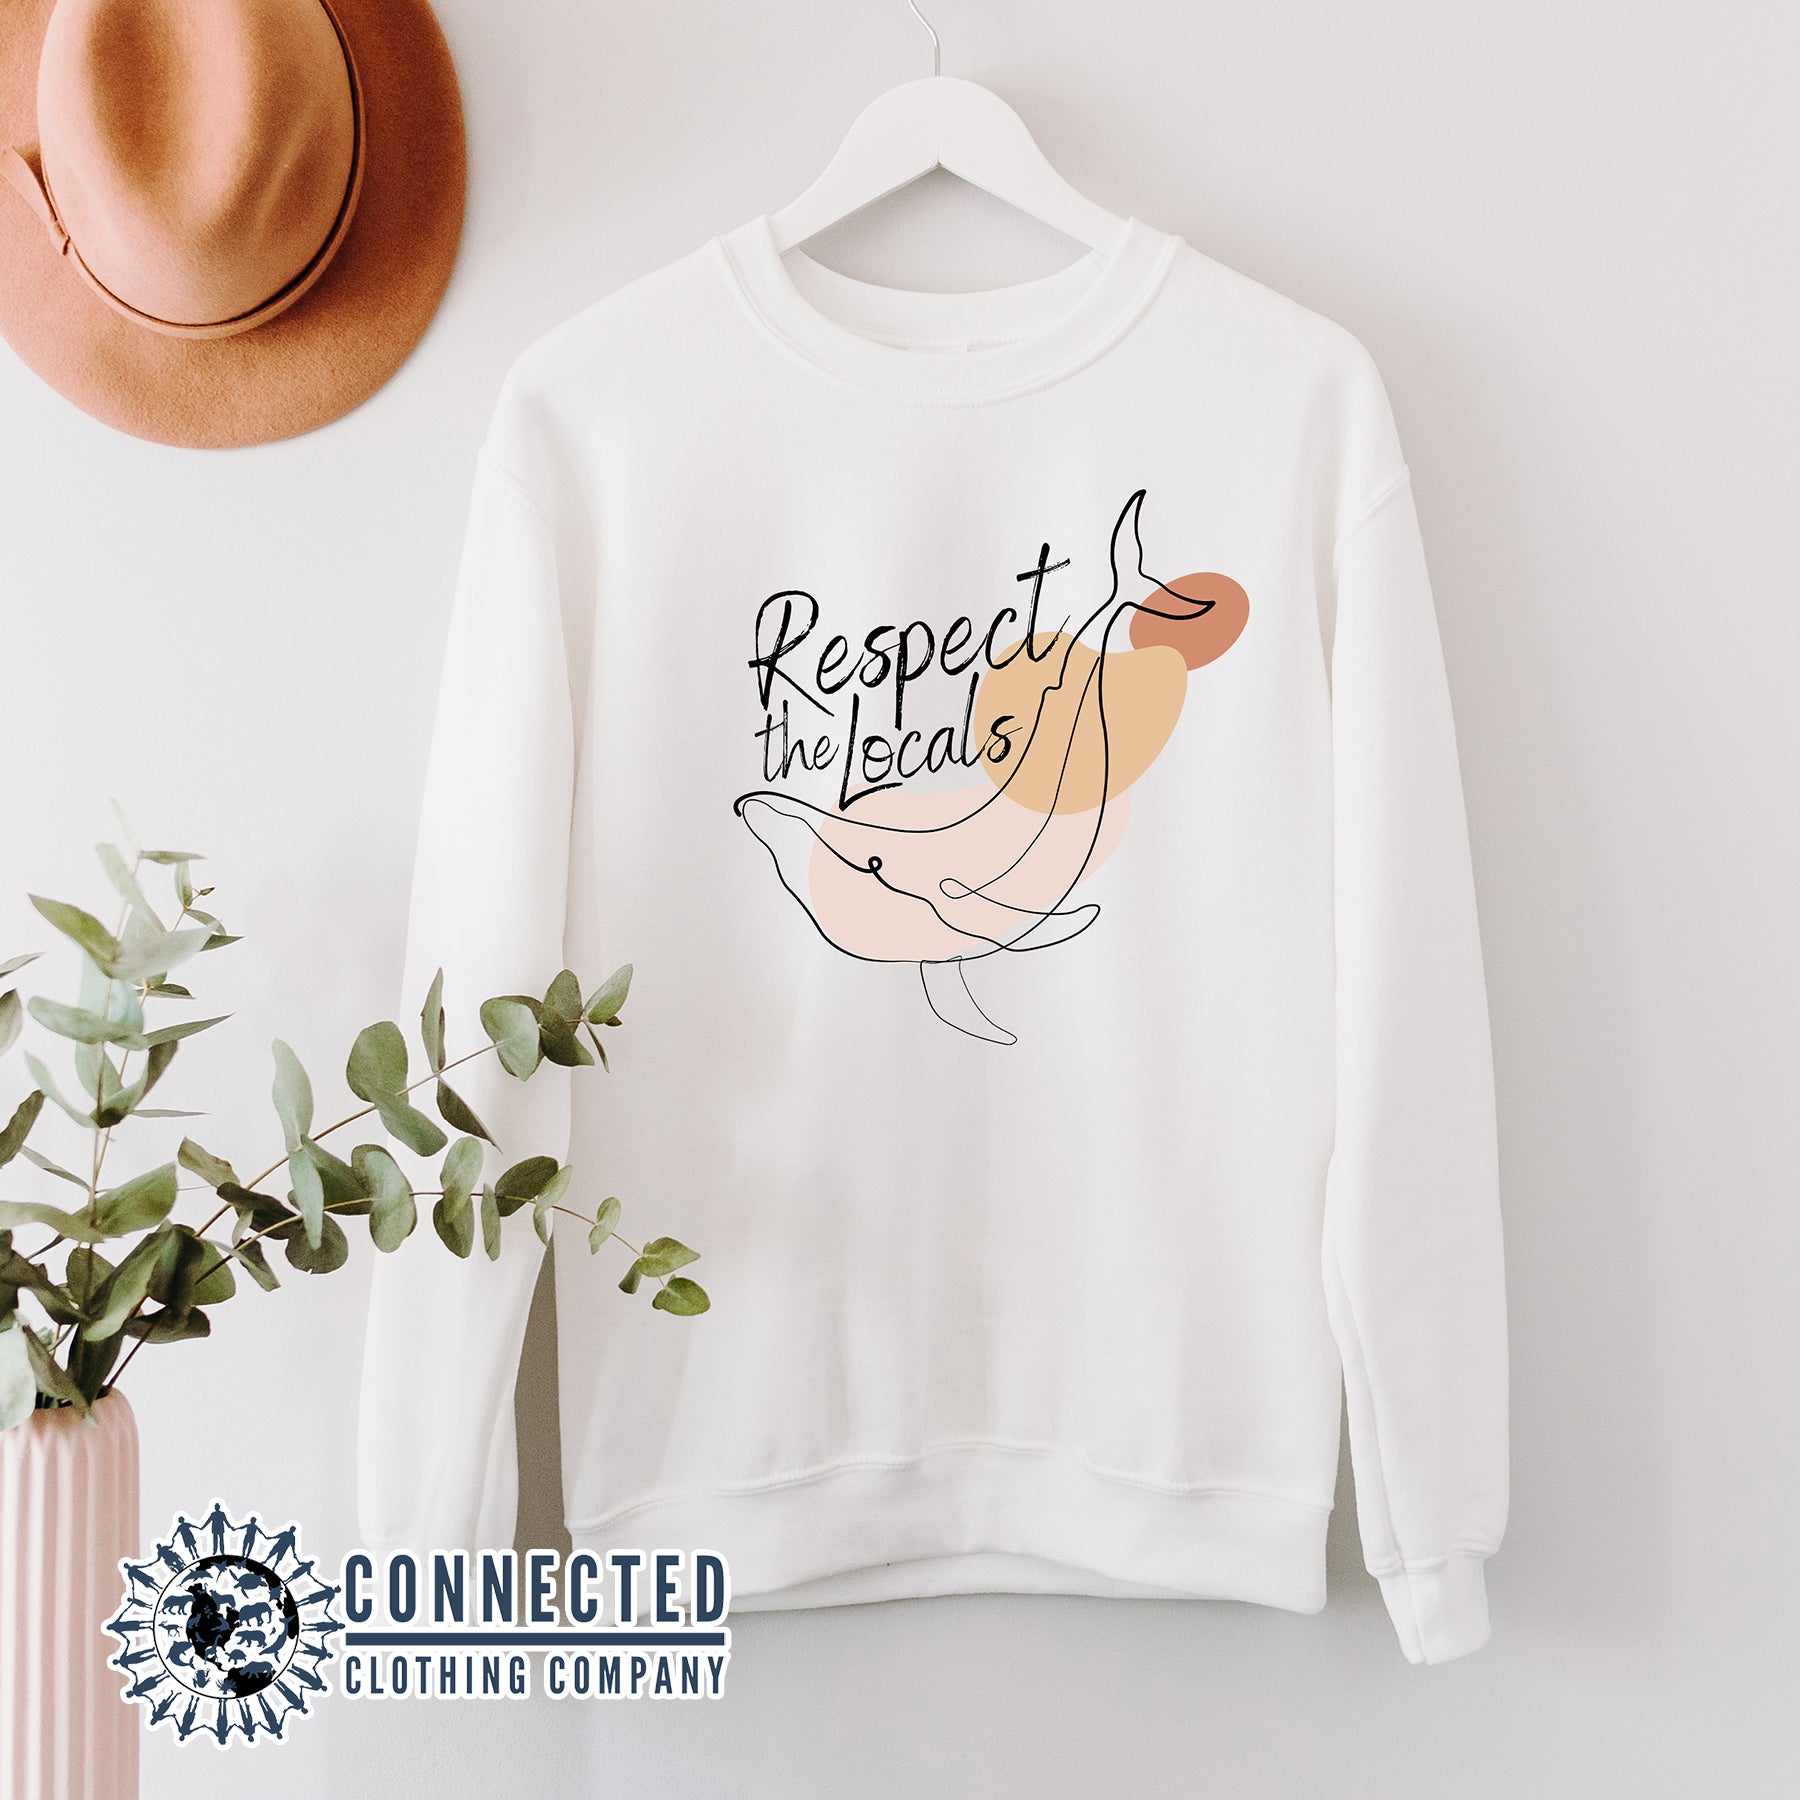 White Respect The Locals Whale Unisex Crewneck Sweatshirt - Connected Clothing Company - Ethically and Sustainably Made - 10% of profits donated to ocean conservation